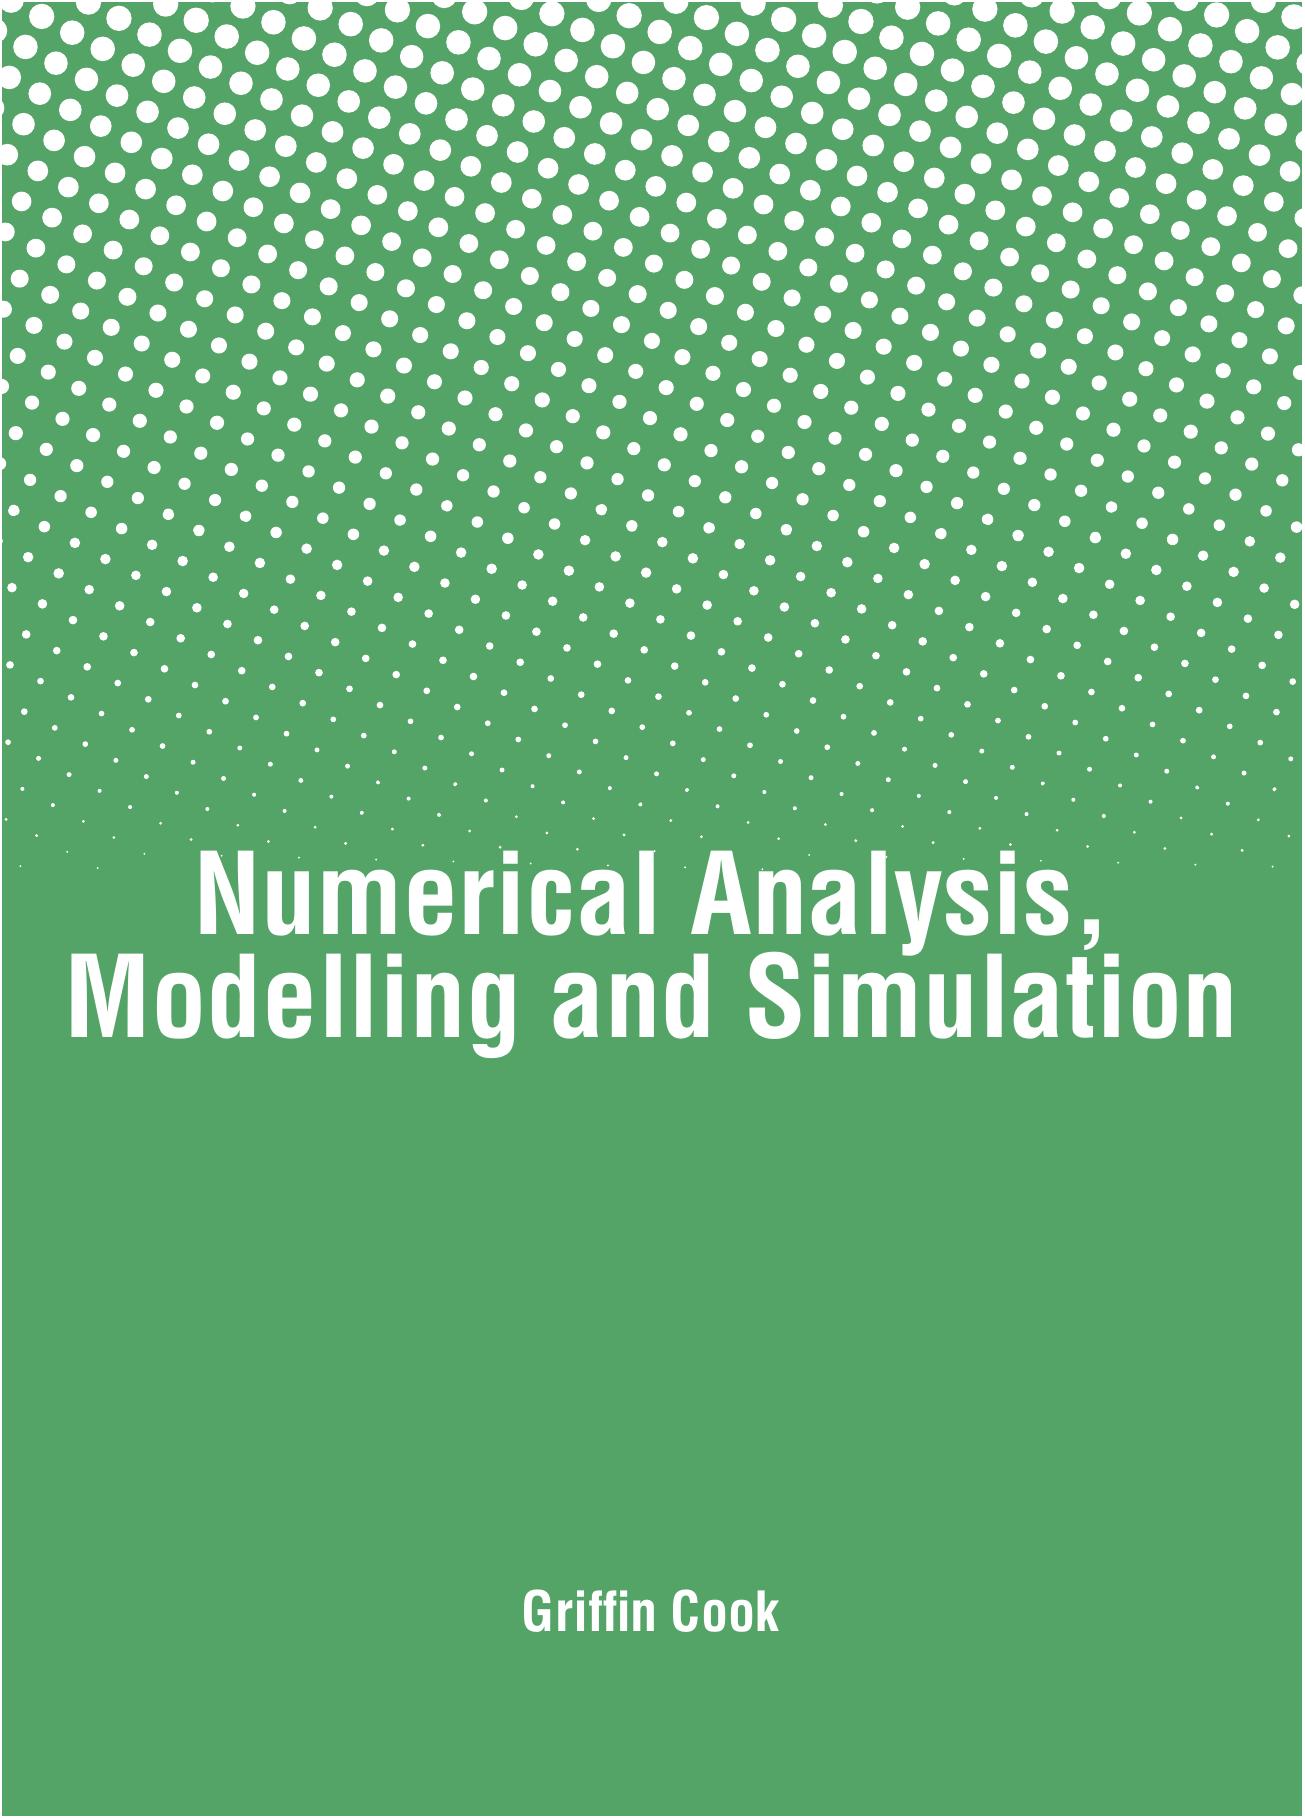 Numerical Analysis, Modelling and Simulation 2018